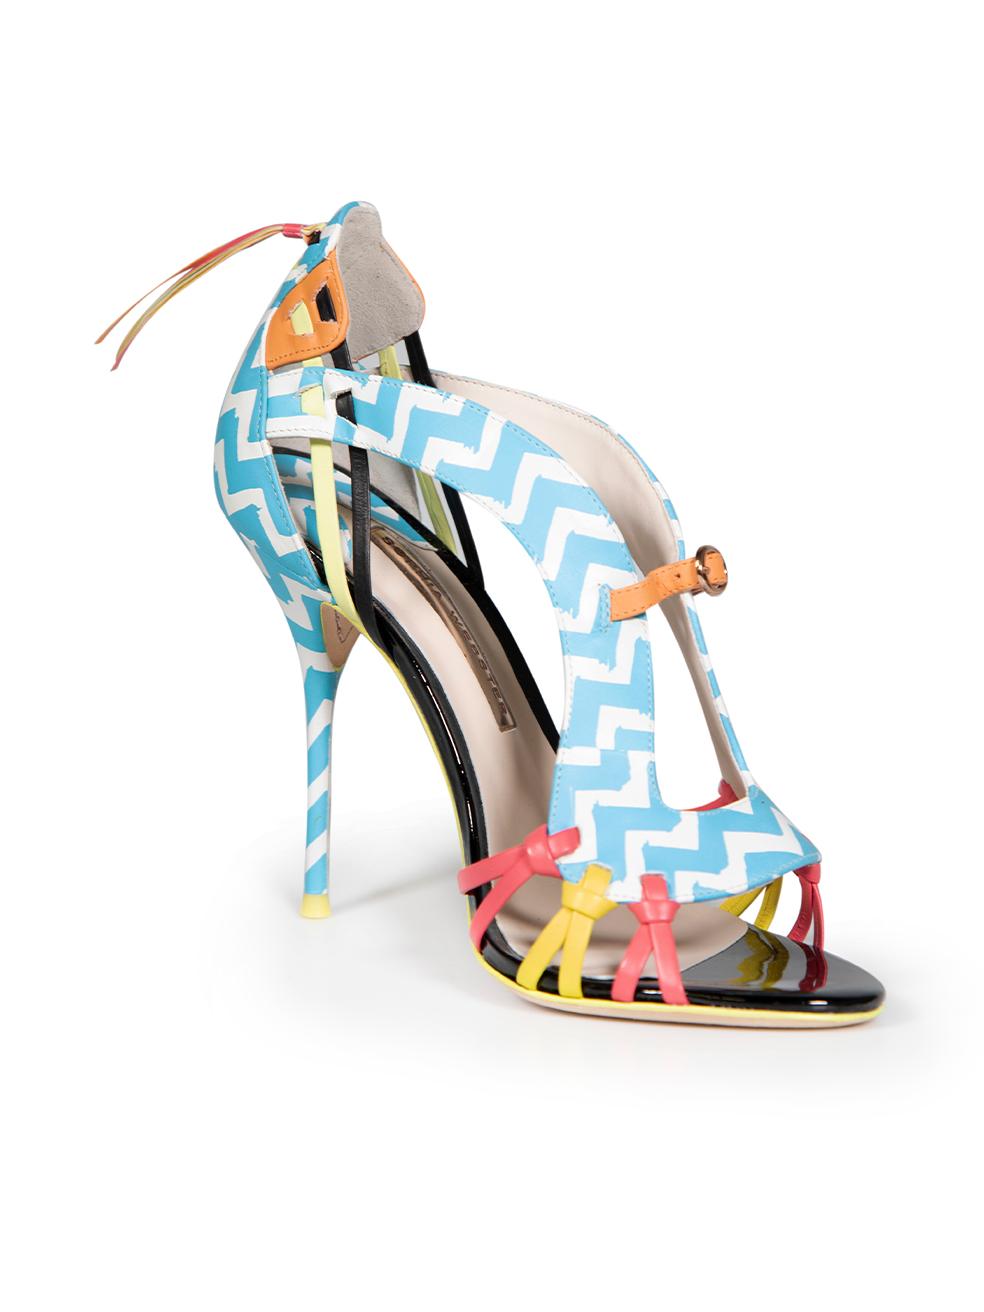 CONDITION is Never worn, with tags. No visible wear to shoes is evident on this new Sophia Webster designer resale item. These shoes come with original box.
 
 
 
 Details
 
 
 Liberty model
 
 Multicolour
 
 Leather
 
 Strappy sandals
 
 Zig zag